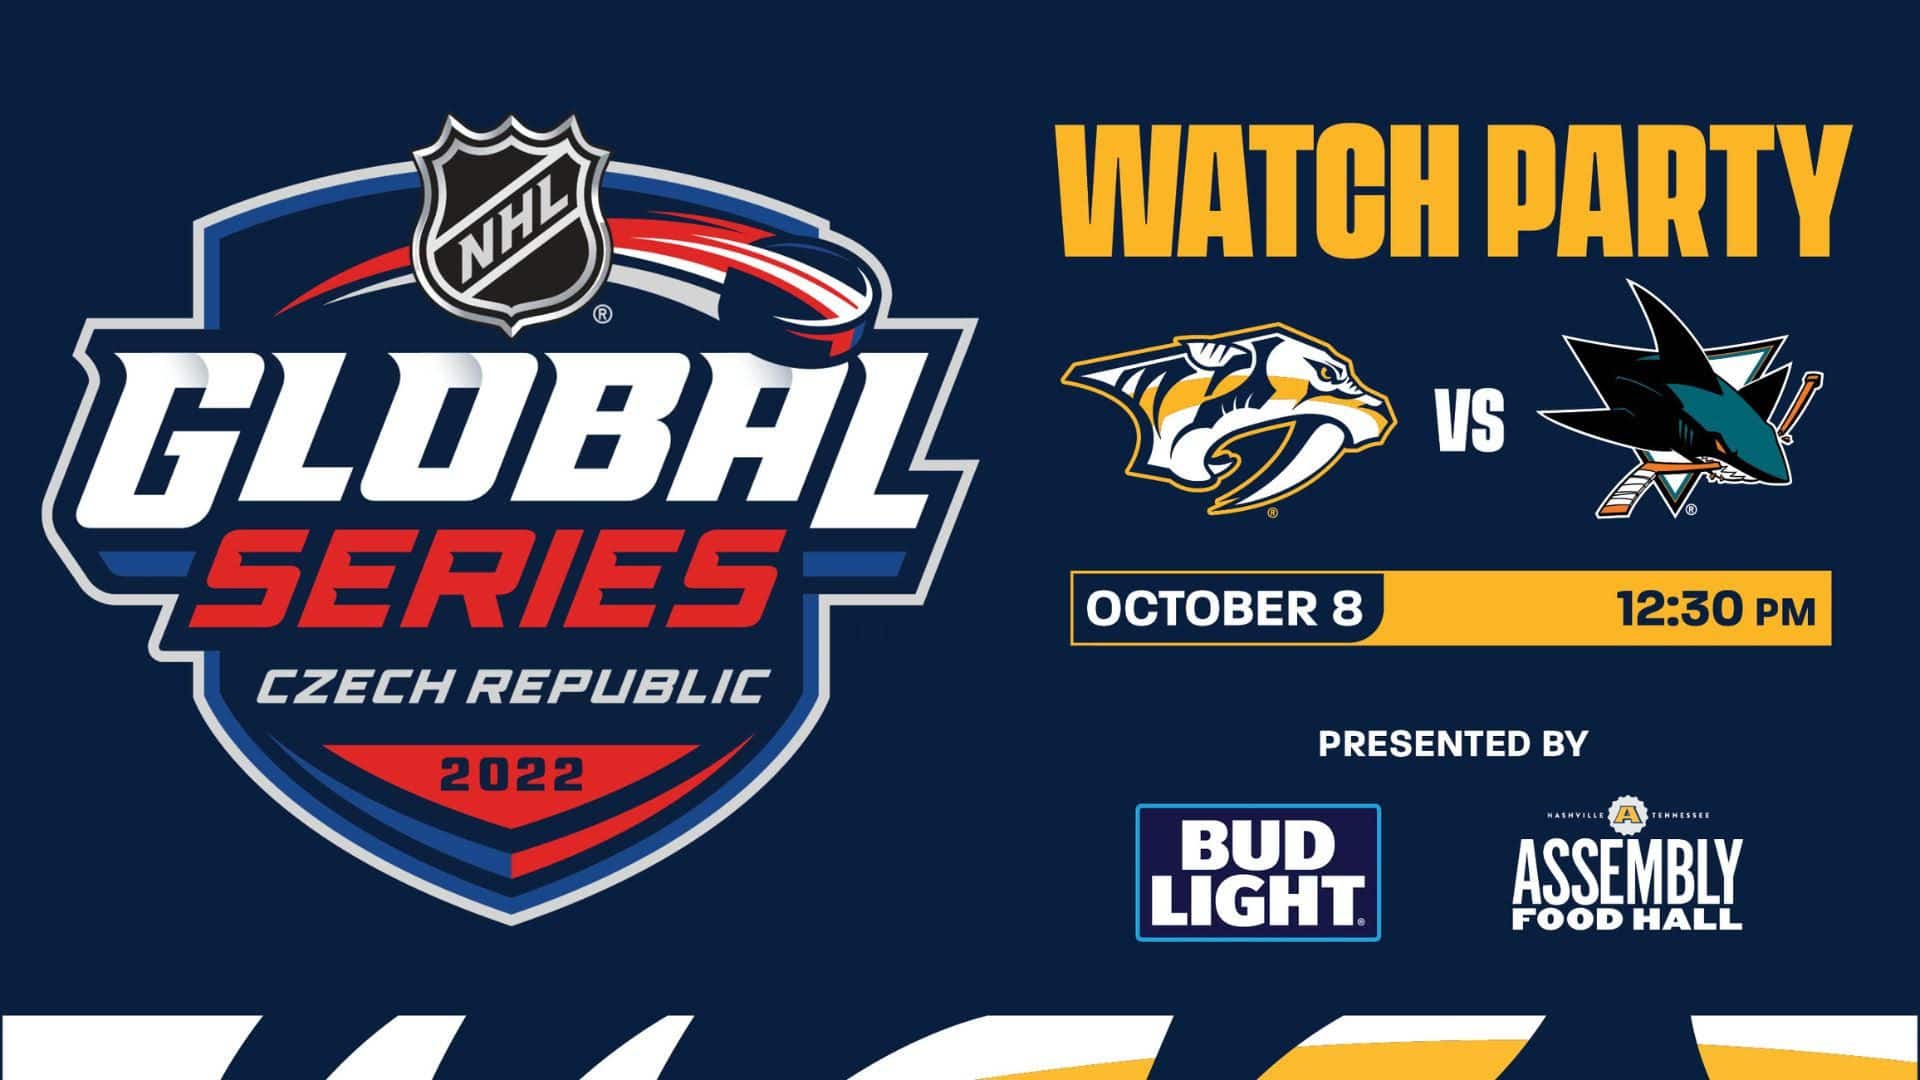 Nashville's Assembly Food Hall Hosts Official Global Series Watch Party for the Nashville Predators.